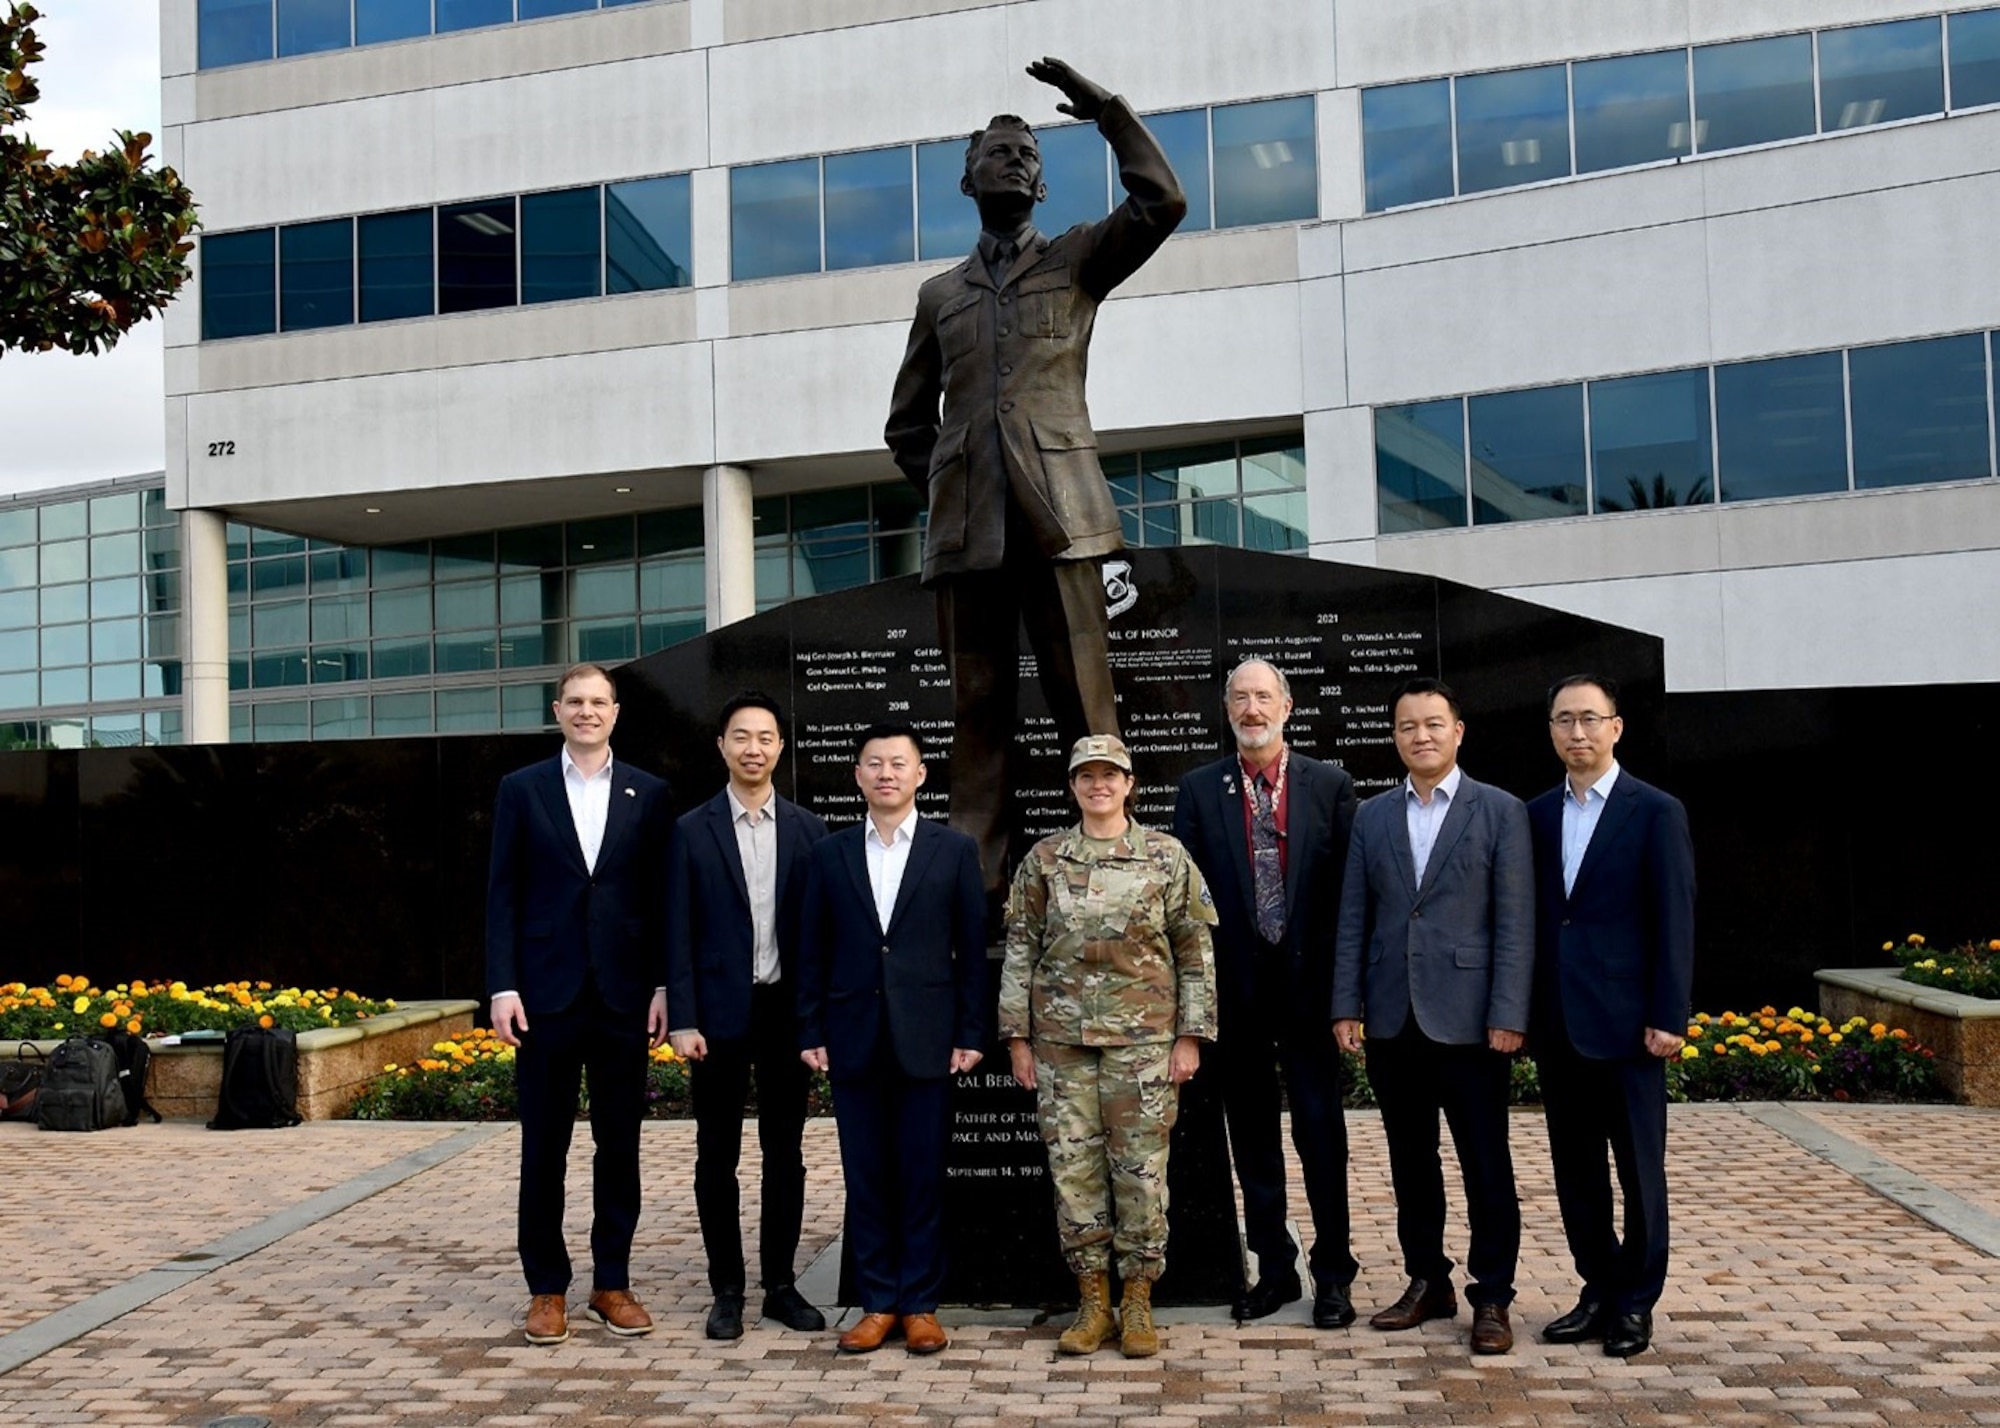 Members of the Korean Defense Acquisition Program Administration (DAPA) (from left to right) Lt. Col. Matt Getts, JUSMAG-Korea, Mr. Yongjun Noh, senior deputy director Satellite Program, Col. Hyunjin Park, DPA R&D Program team lead, Col. Michelle Idle, mobilization assistant to the commander, SSC, Dr. Steve Pluntze, executive director, SSC International Affairs  Office, Lt. Col. Jaeyong Lee, Satellite Program manager, and Mr. Hyunjong Kim, specialized official for the Satellite Program Management Office, during a visit to SSC Sept. 20-21. This was the first time a delegation from the Republic of Korea has visited SSC. (Photo by Jose Lou Hernandez, SSC)